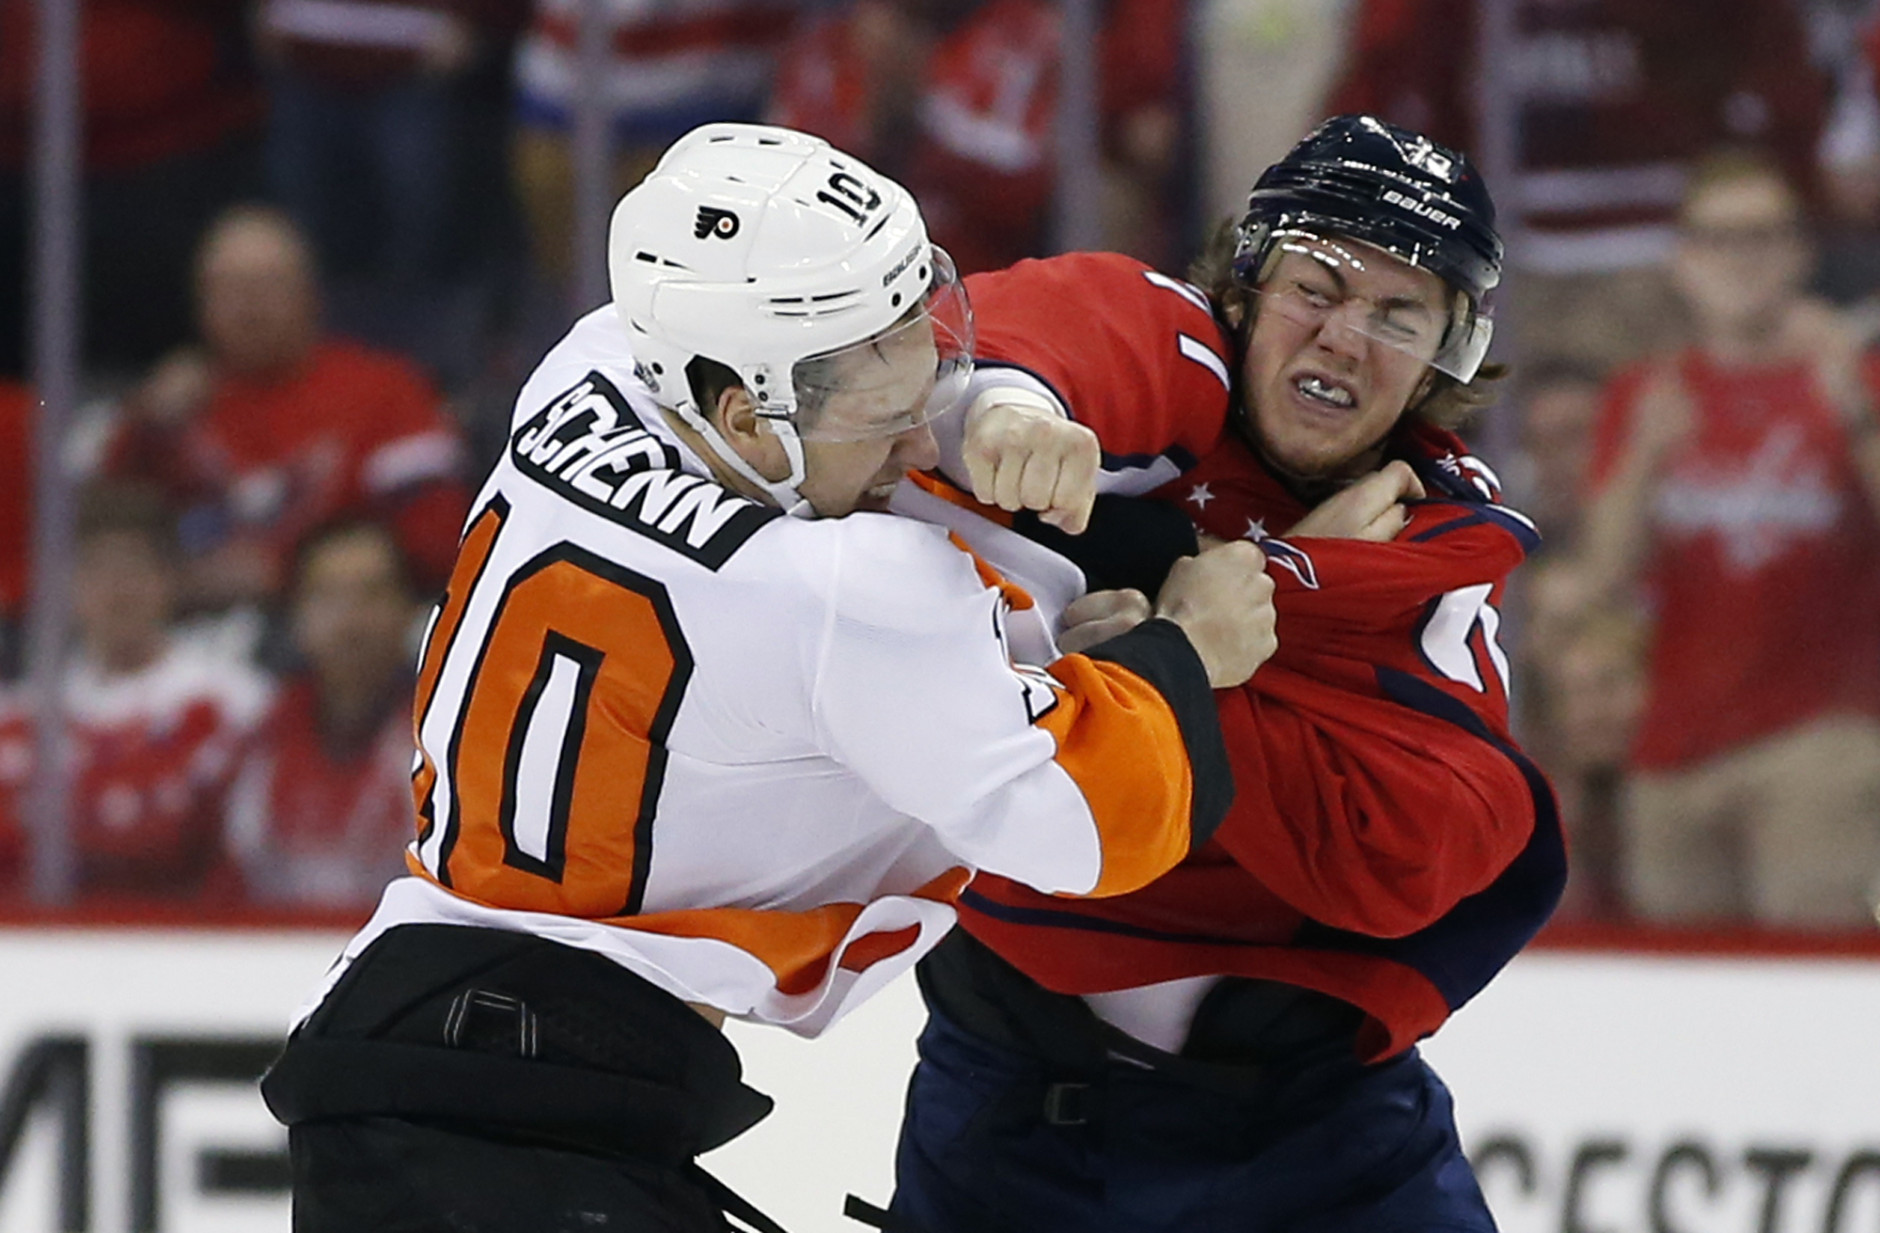 Philadelphia Flyers center Brayden Schenn (10) and Washington Capitals right wing T.J. Oshie (77) fight during the first period of Game 5 in the first round of the NHL Stanley Cup hockey playoffs Friday, April 22, 2016, in Washington. (AP Photo/Alex Brandon)